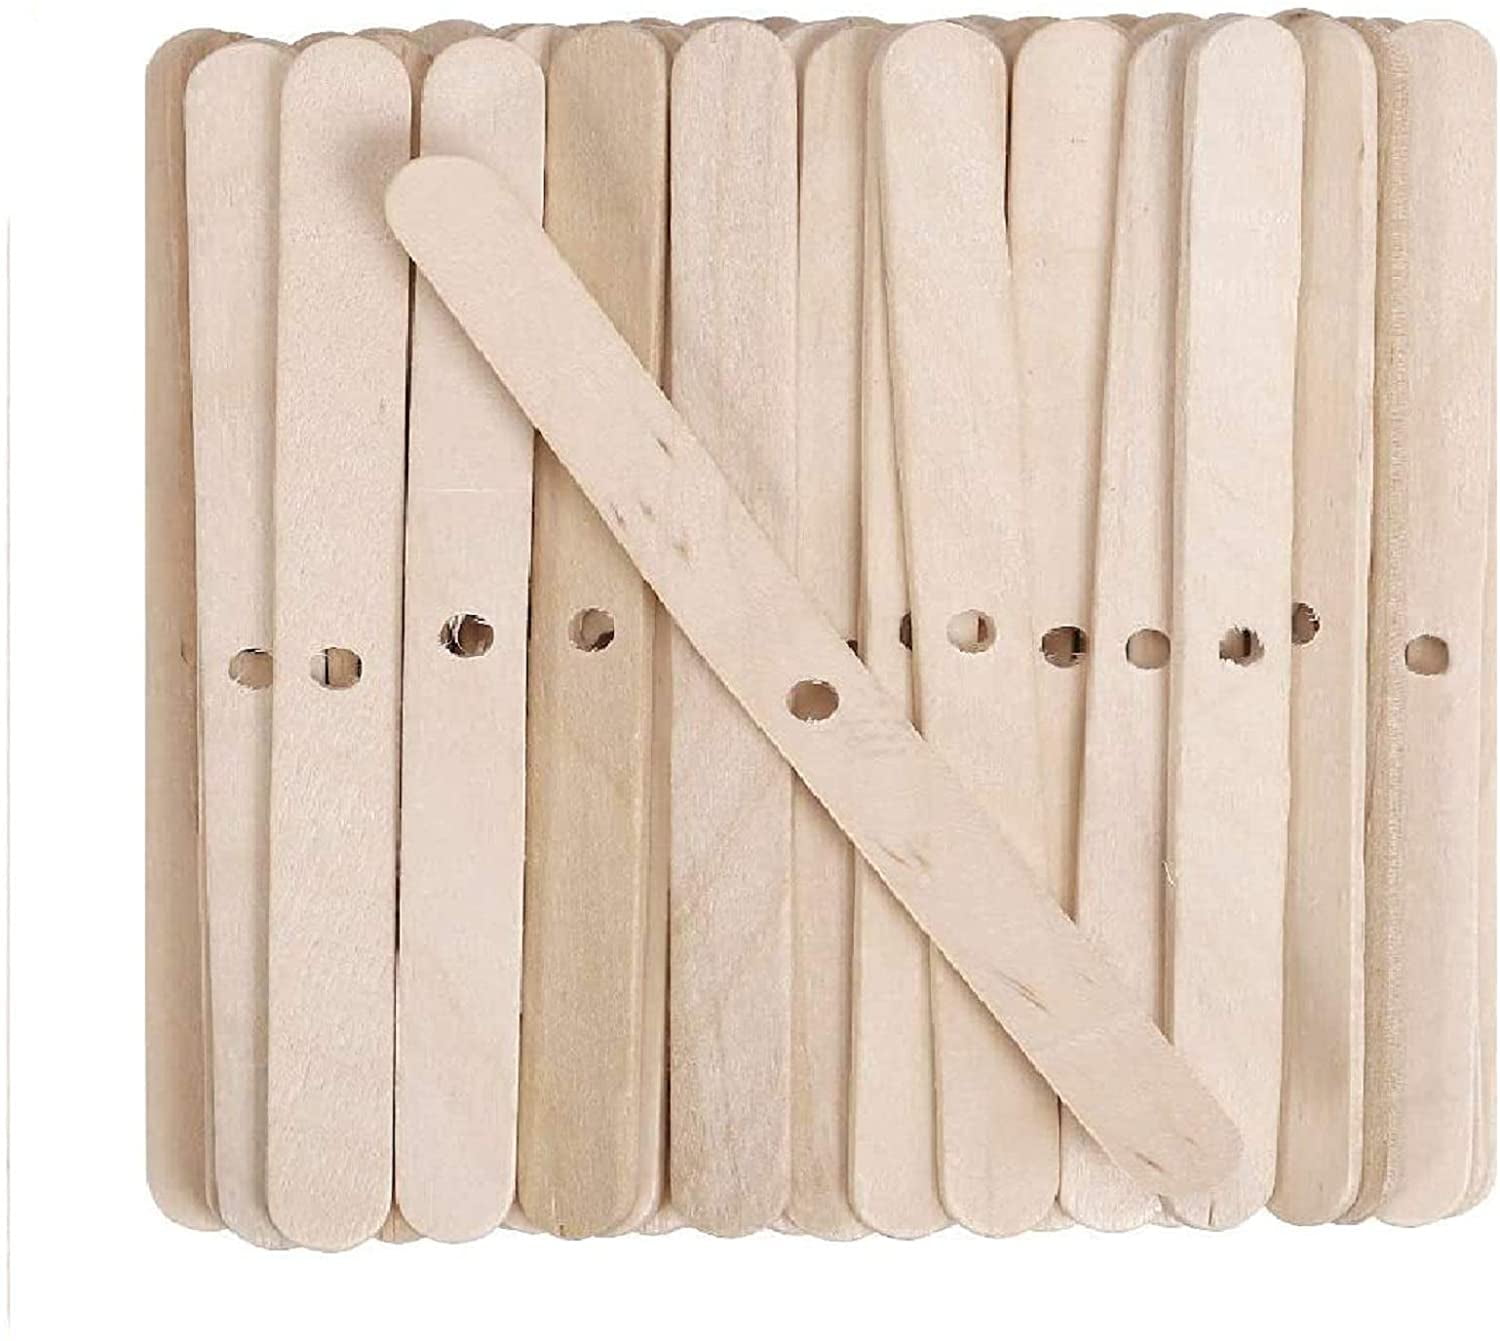 120 Pieces Wooden Candle Wick Holders 4.5 Inch Candle Wick Bars Candle Wick  Centering Device for Candle Making and DIY Crafts